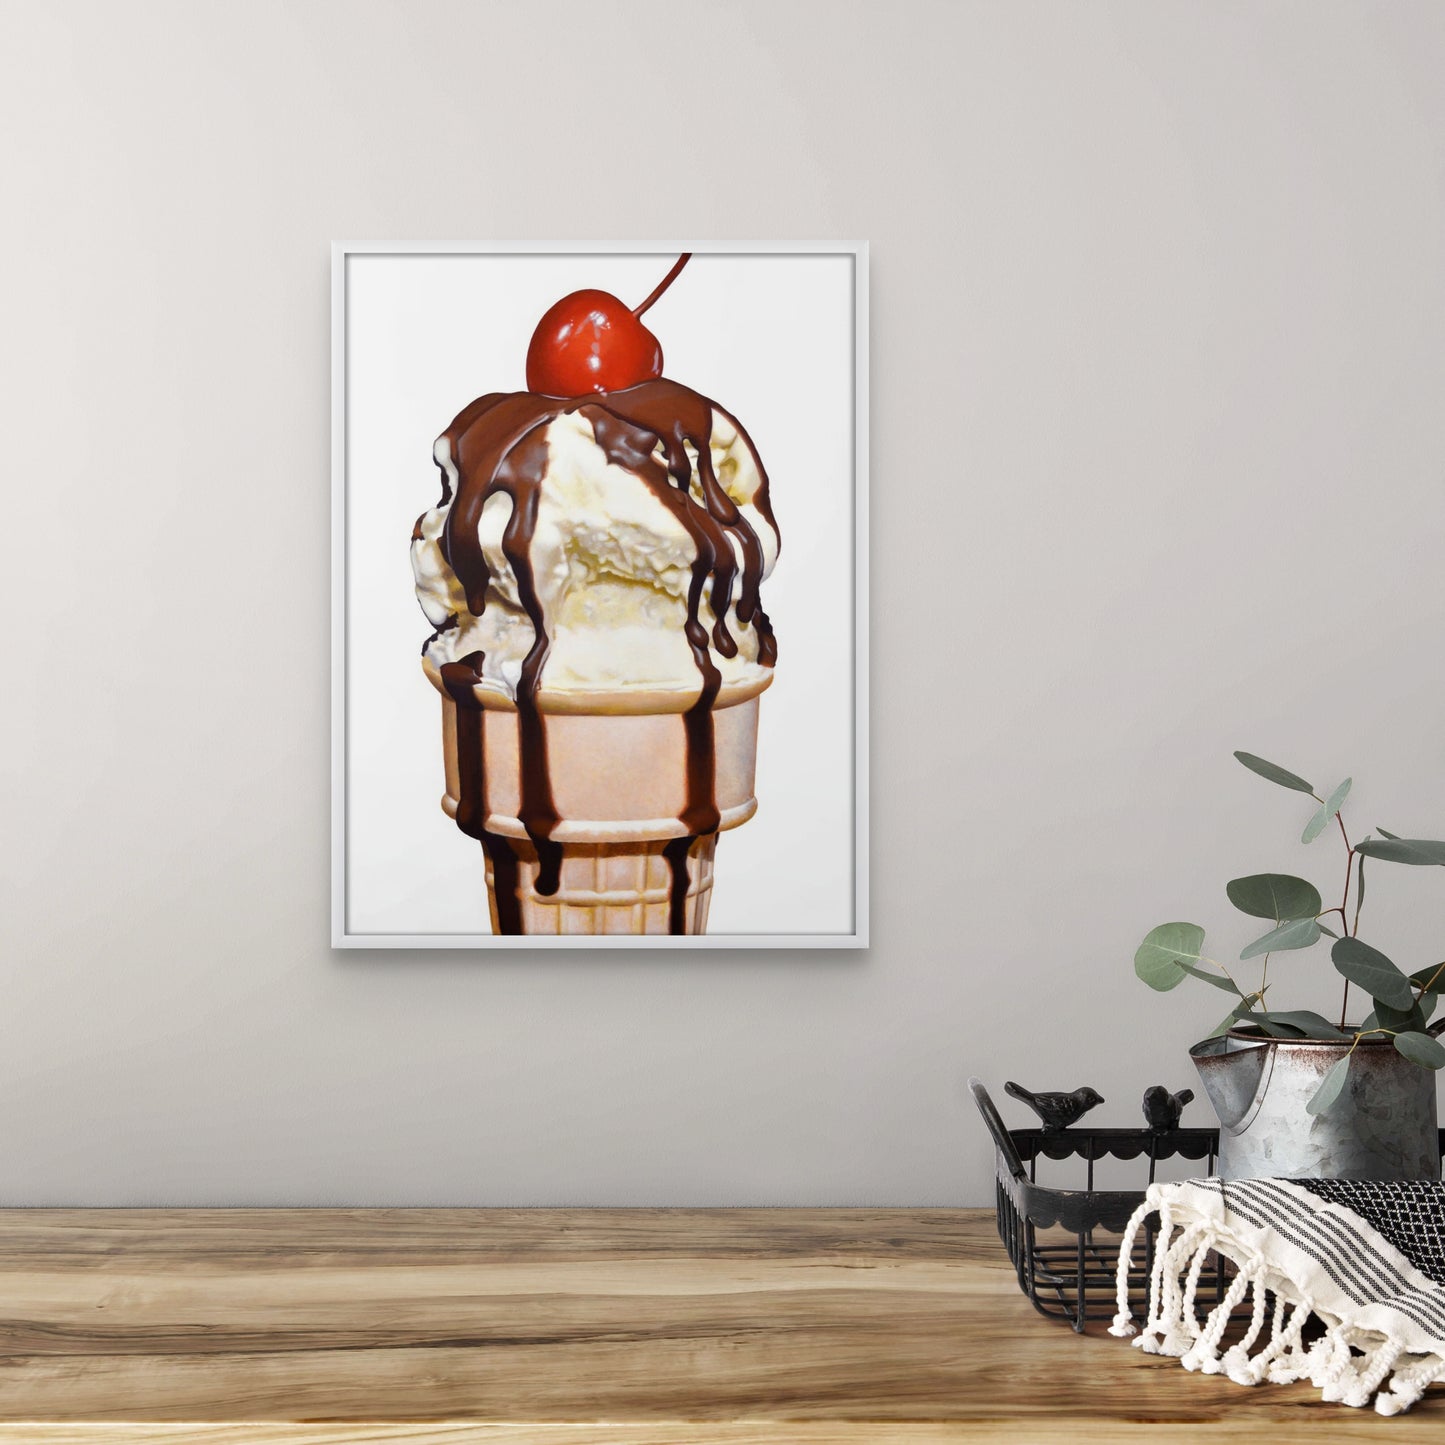 Cherry on Top Ice Cream Cone Art Print | Limited Edition of 50